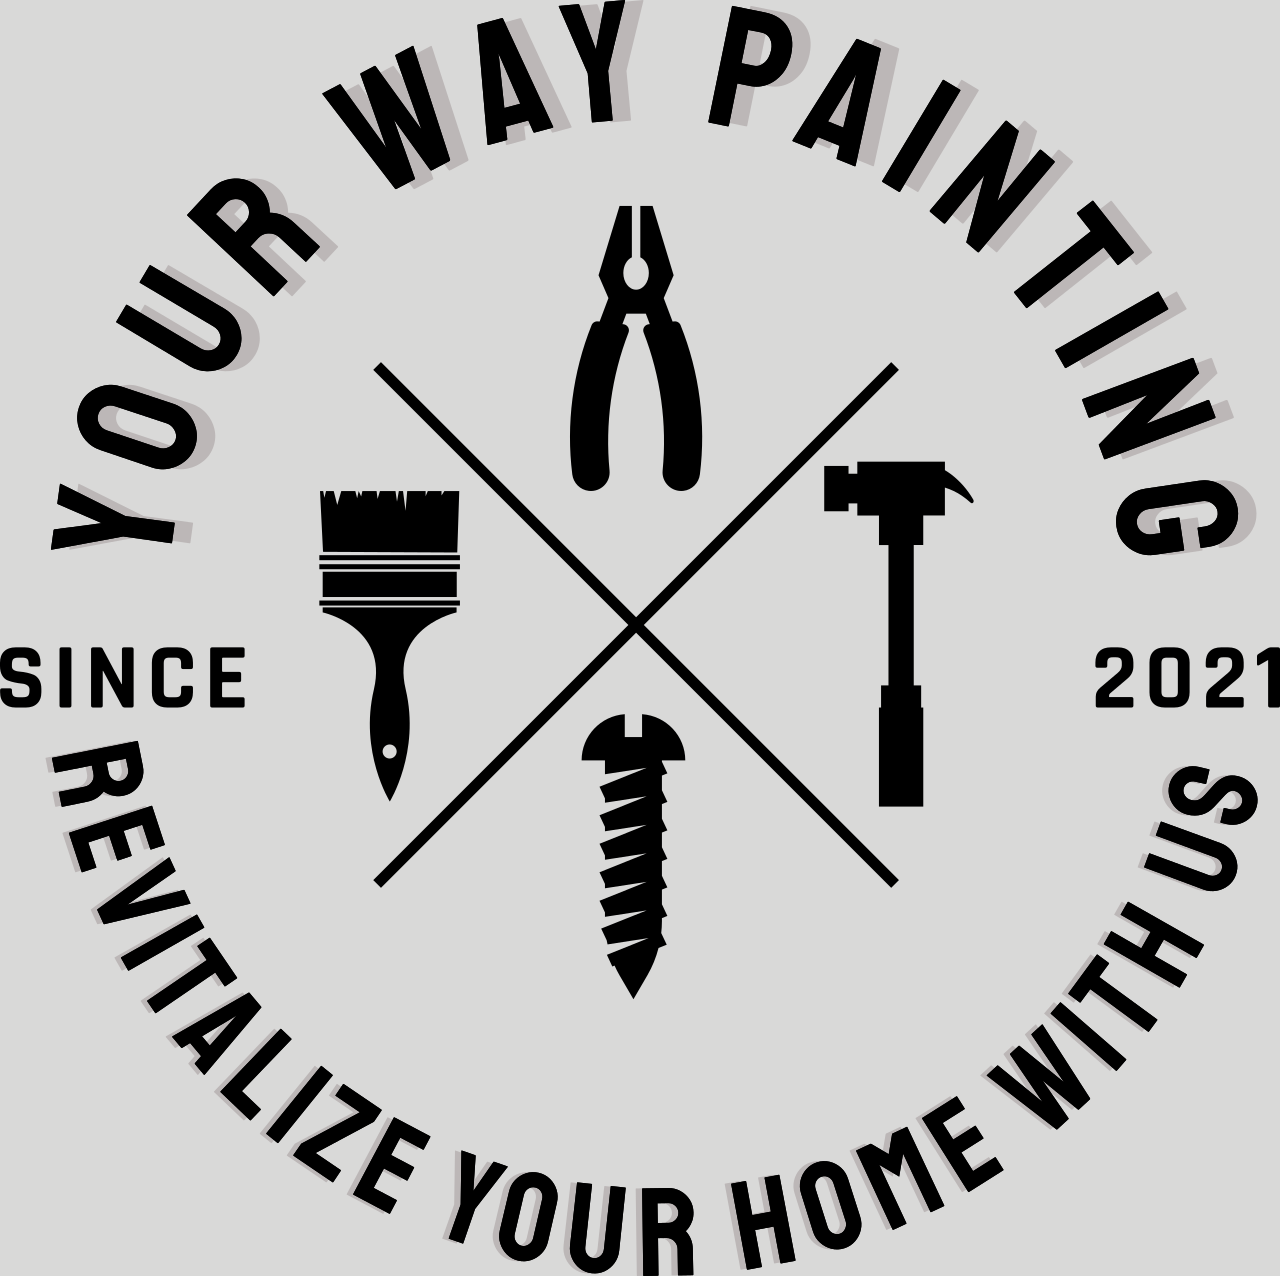 Your way painting's logo